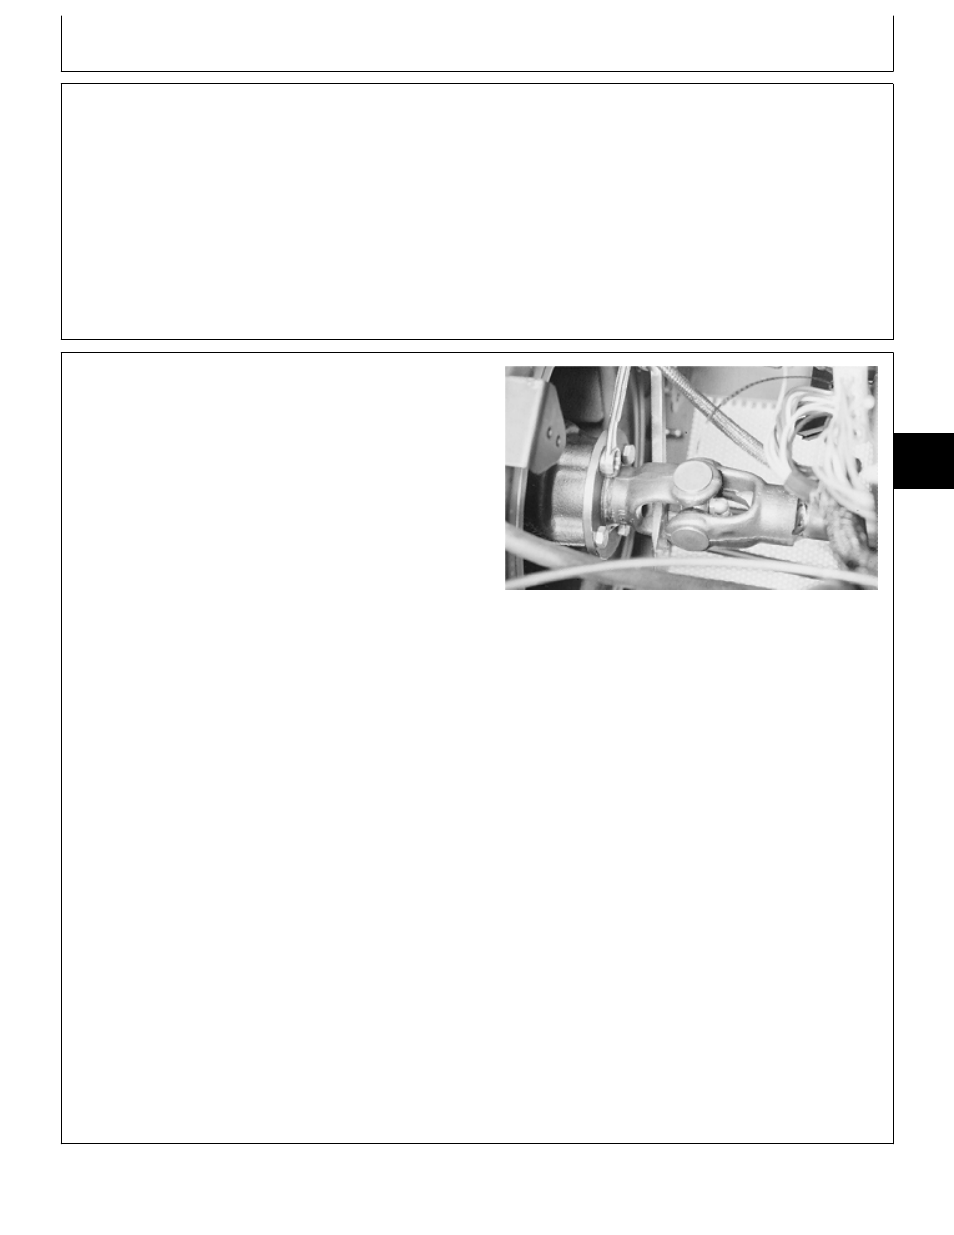 Drive shaft, Remove and install drive shaft—316, Group 25 | Other material | John Deere 318 User Manual | Page 125 / 440